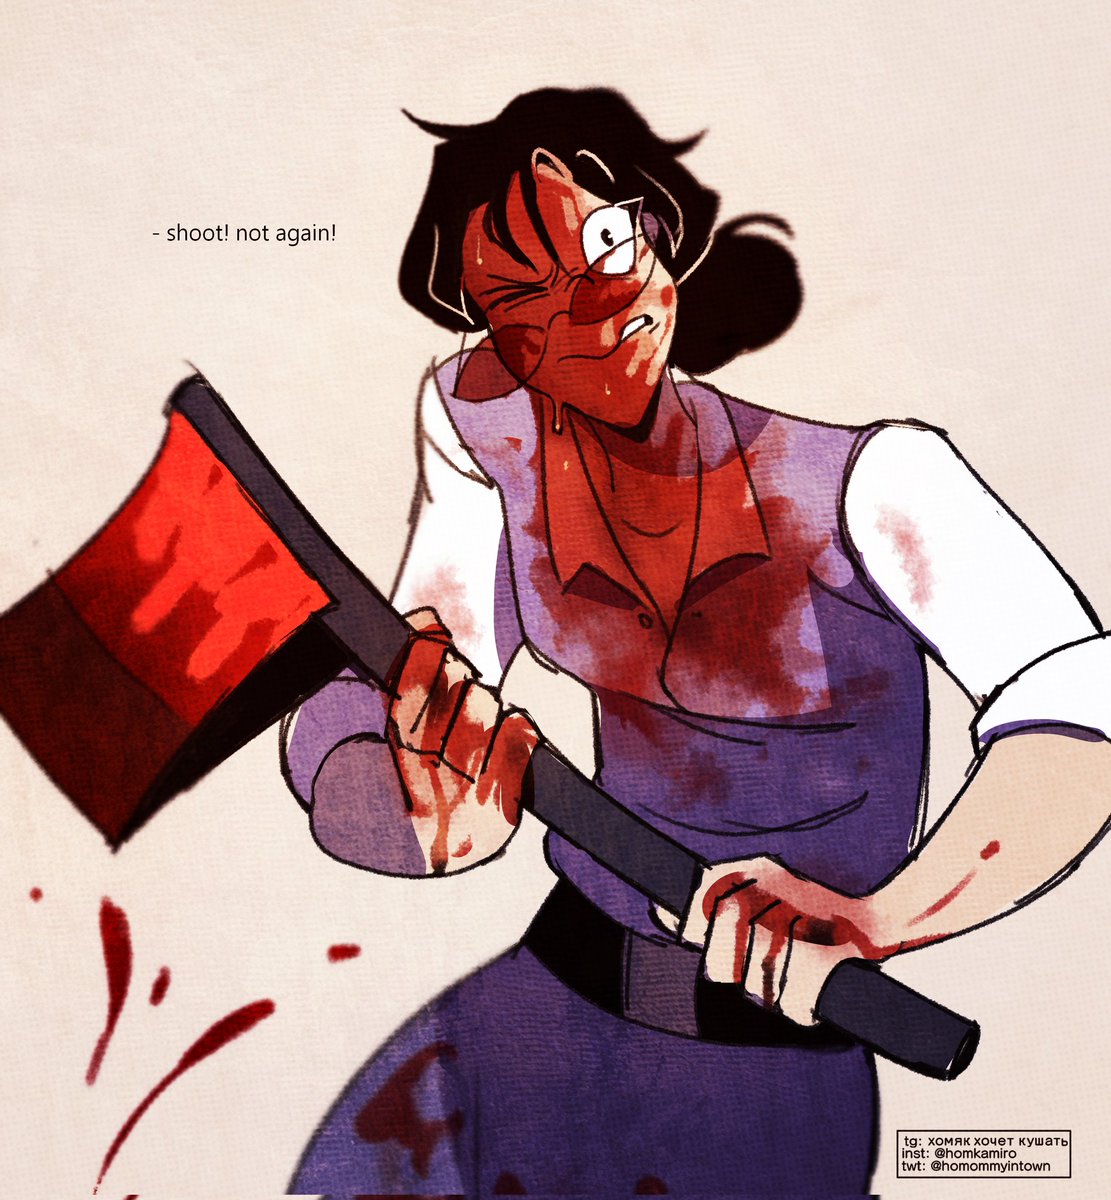 In the women covered in blood we trust

#tf2 #teamfortress2